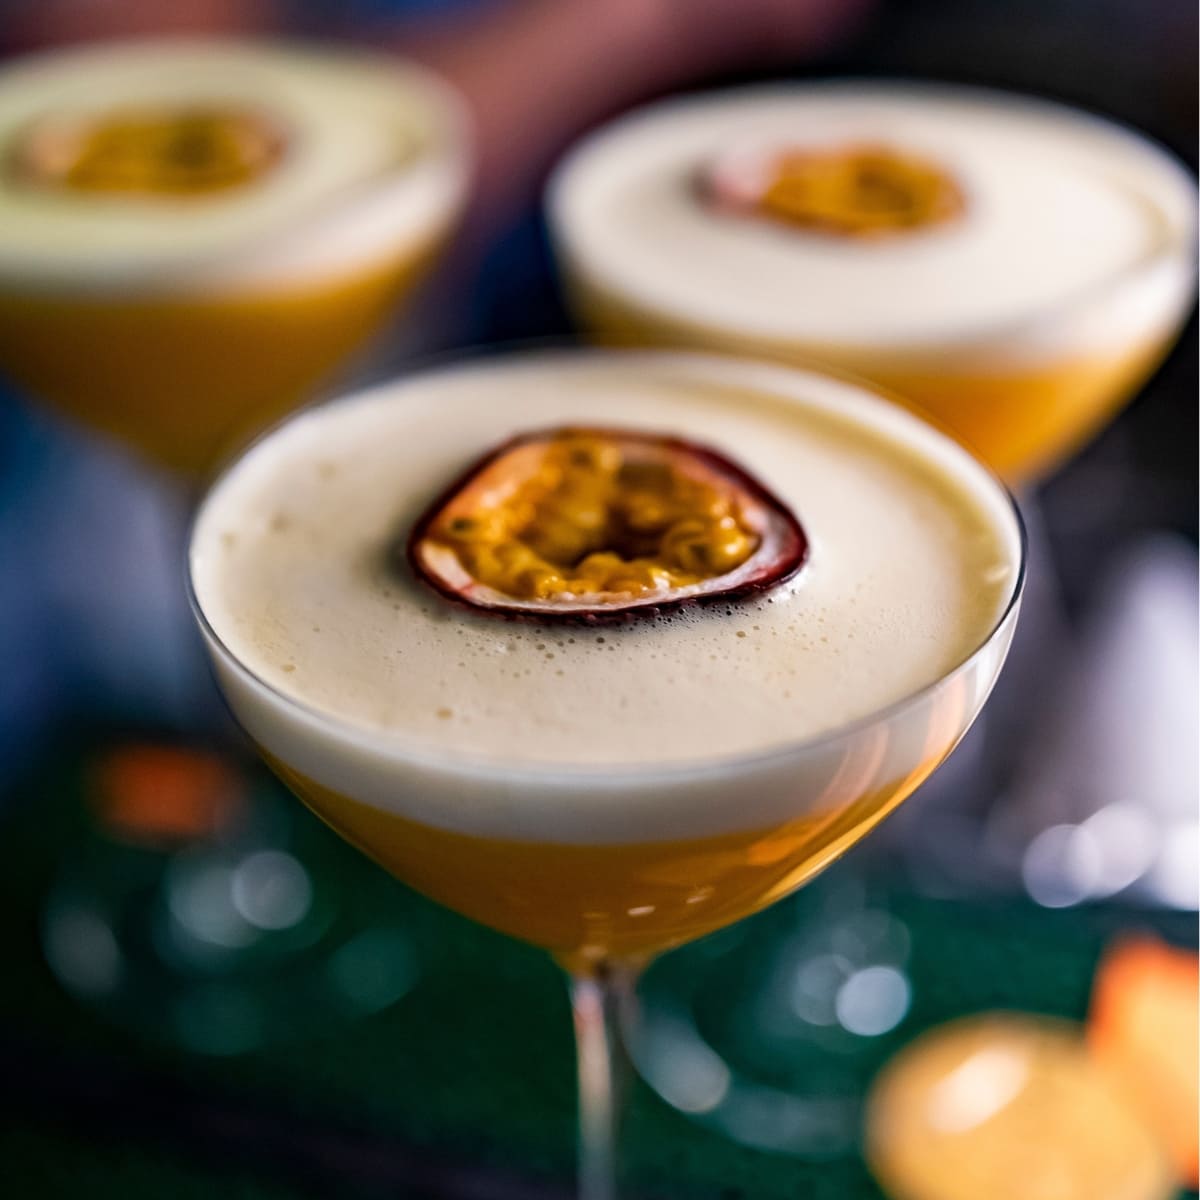 Three glasses of foamy porn star martini with passion fruit slice in half garnish on top. 